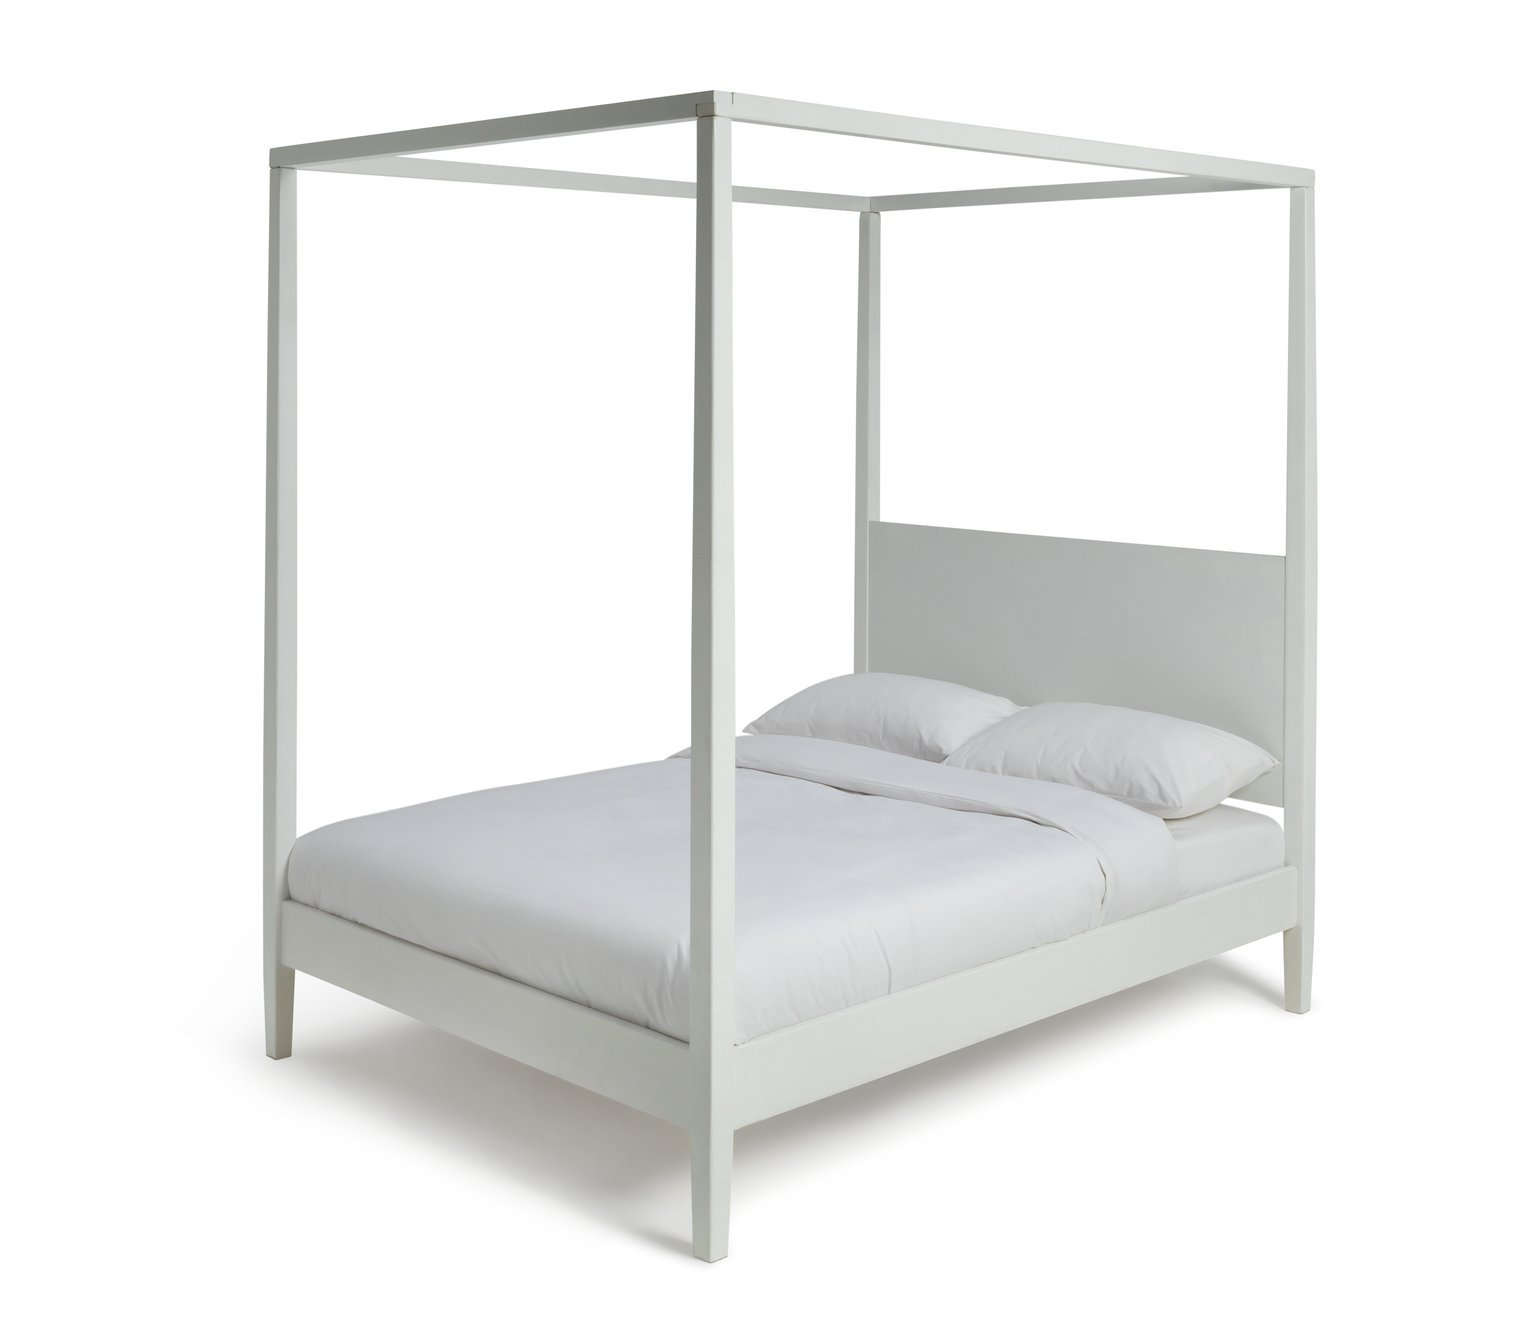 Argos Home Blissford Four Poster Double Bed Frame Review